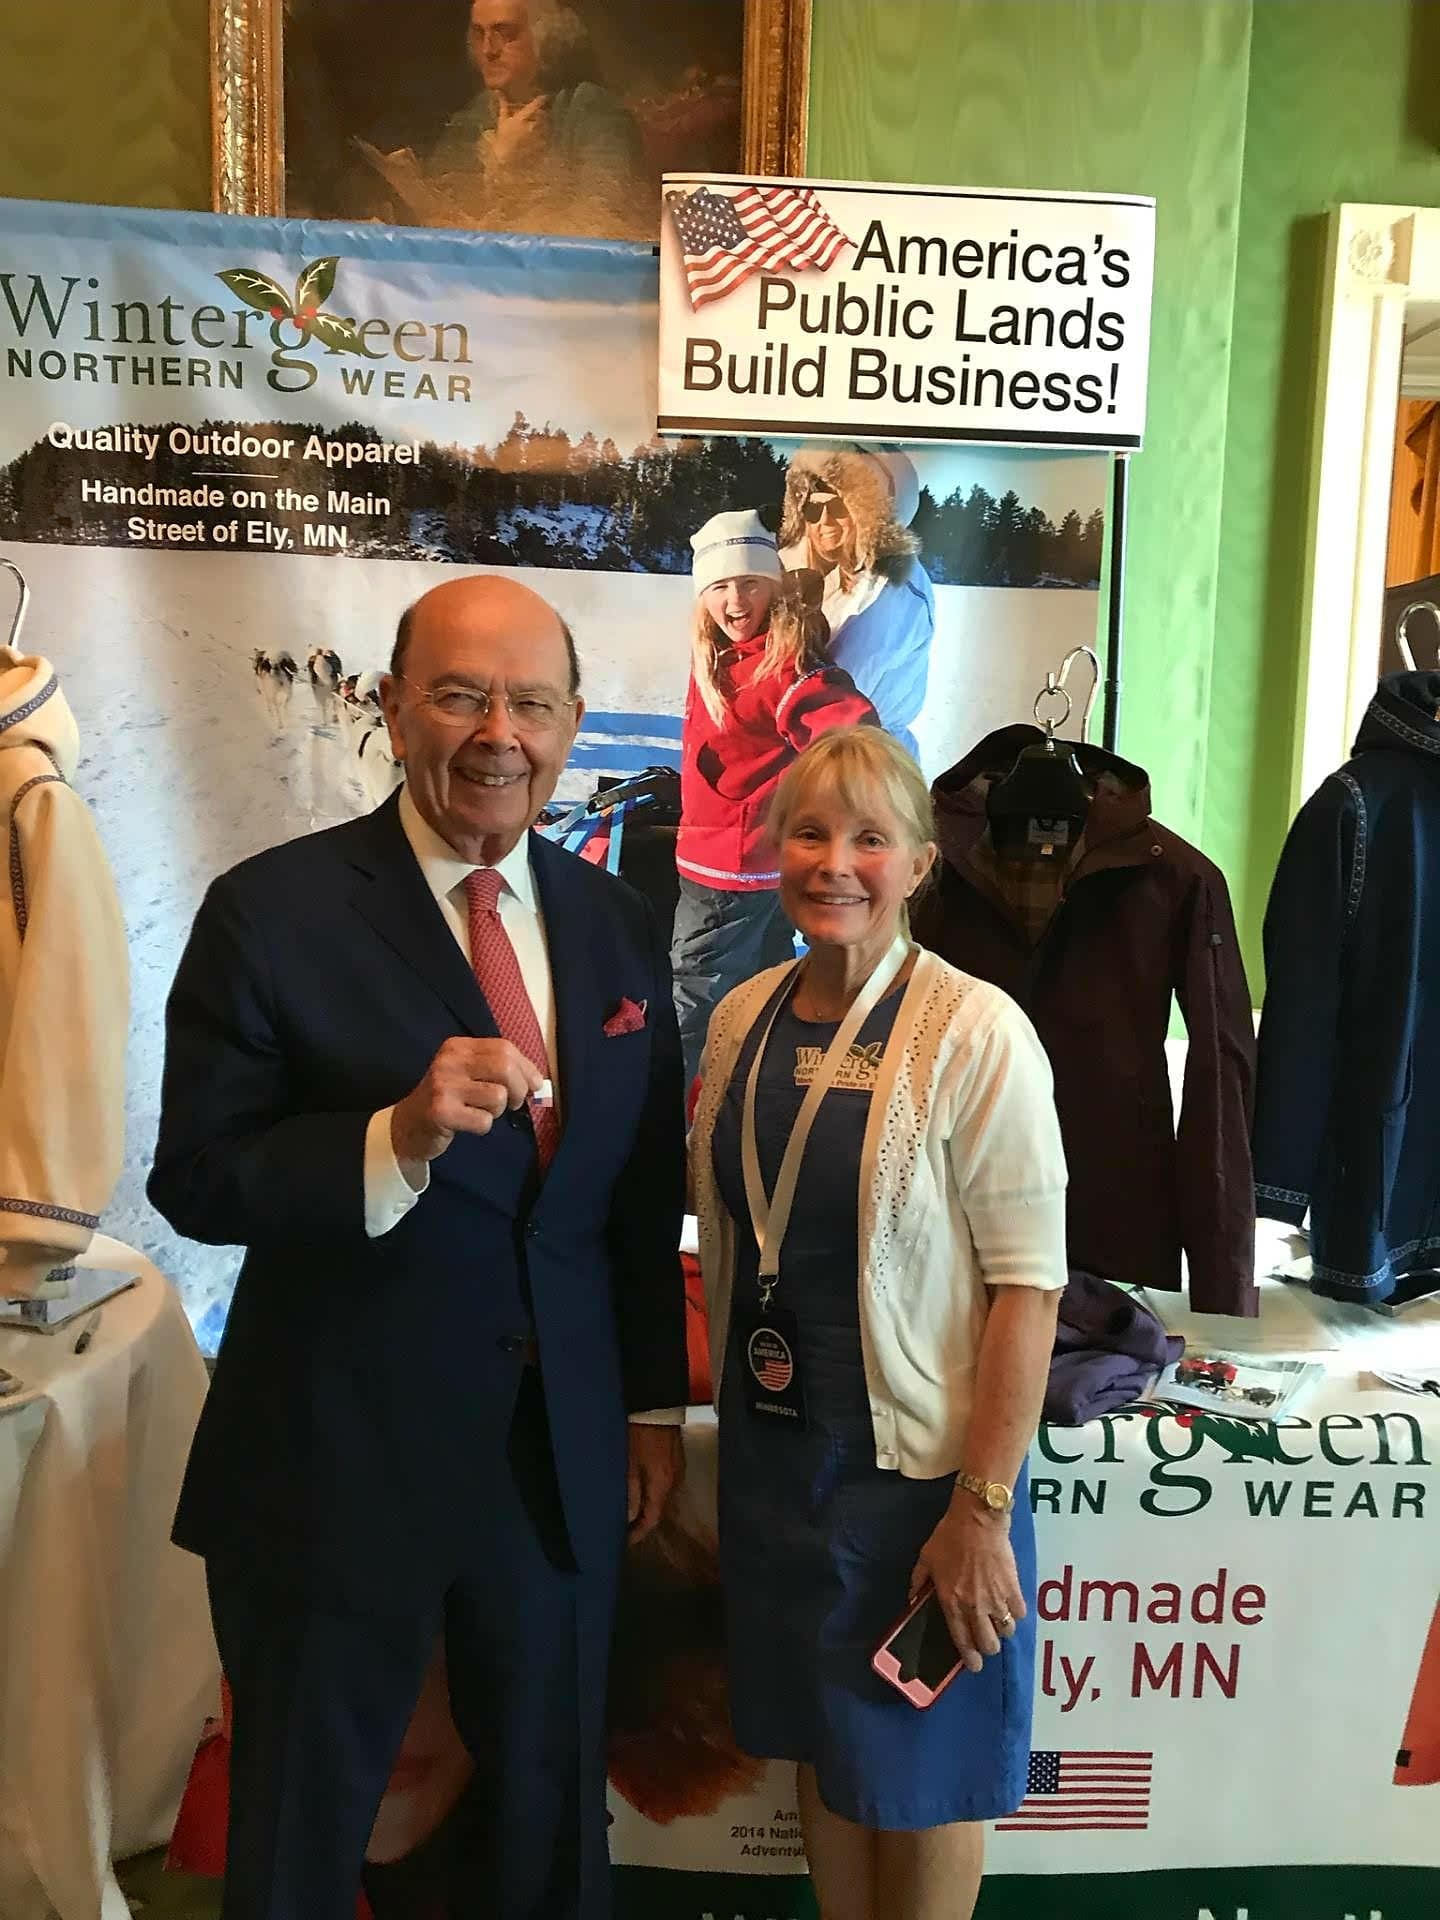 Wintergreen Northern Wear featured at Made in America Product Showcase at White House